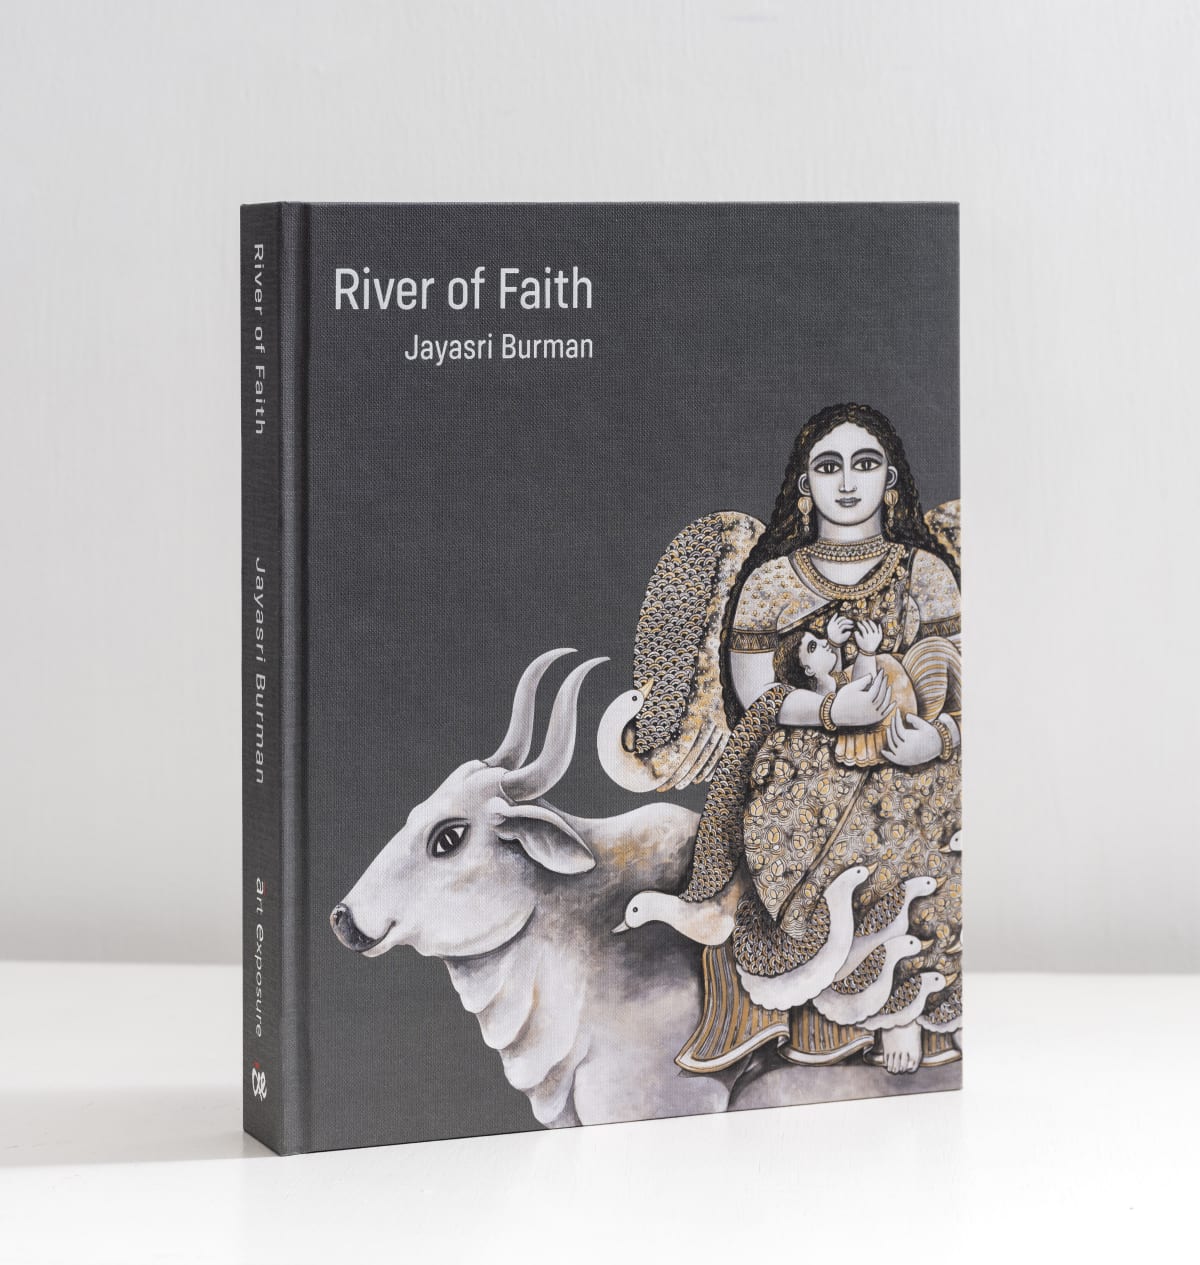 River of Faith by Jayasri Burman, published by Gallery Art Exposure